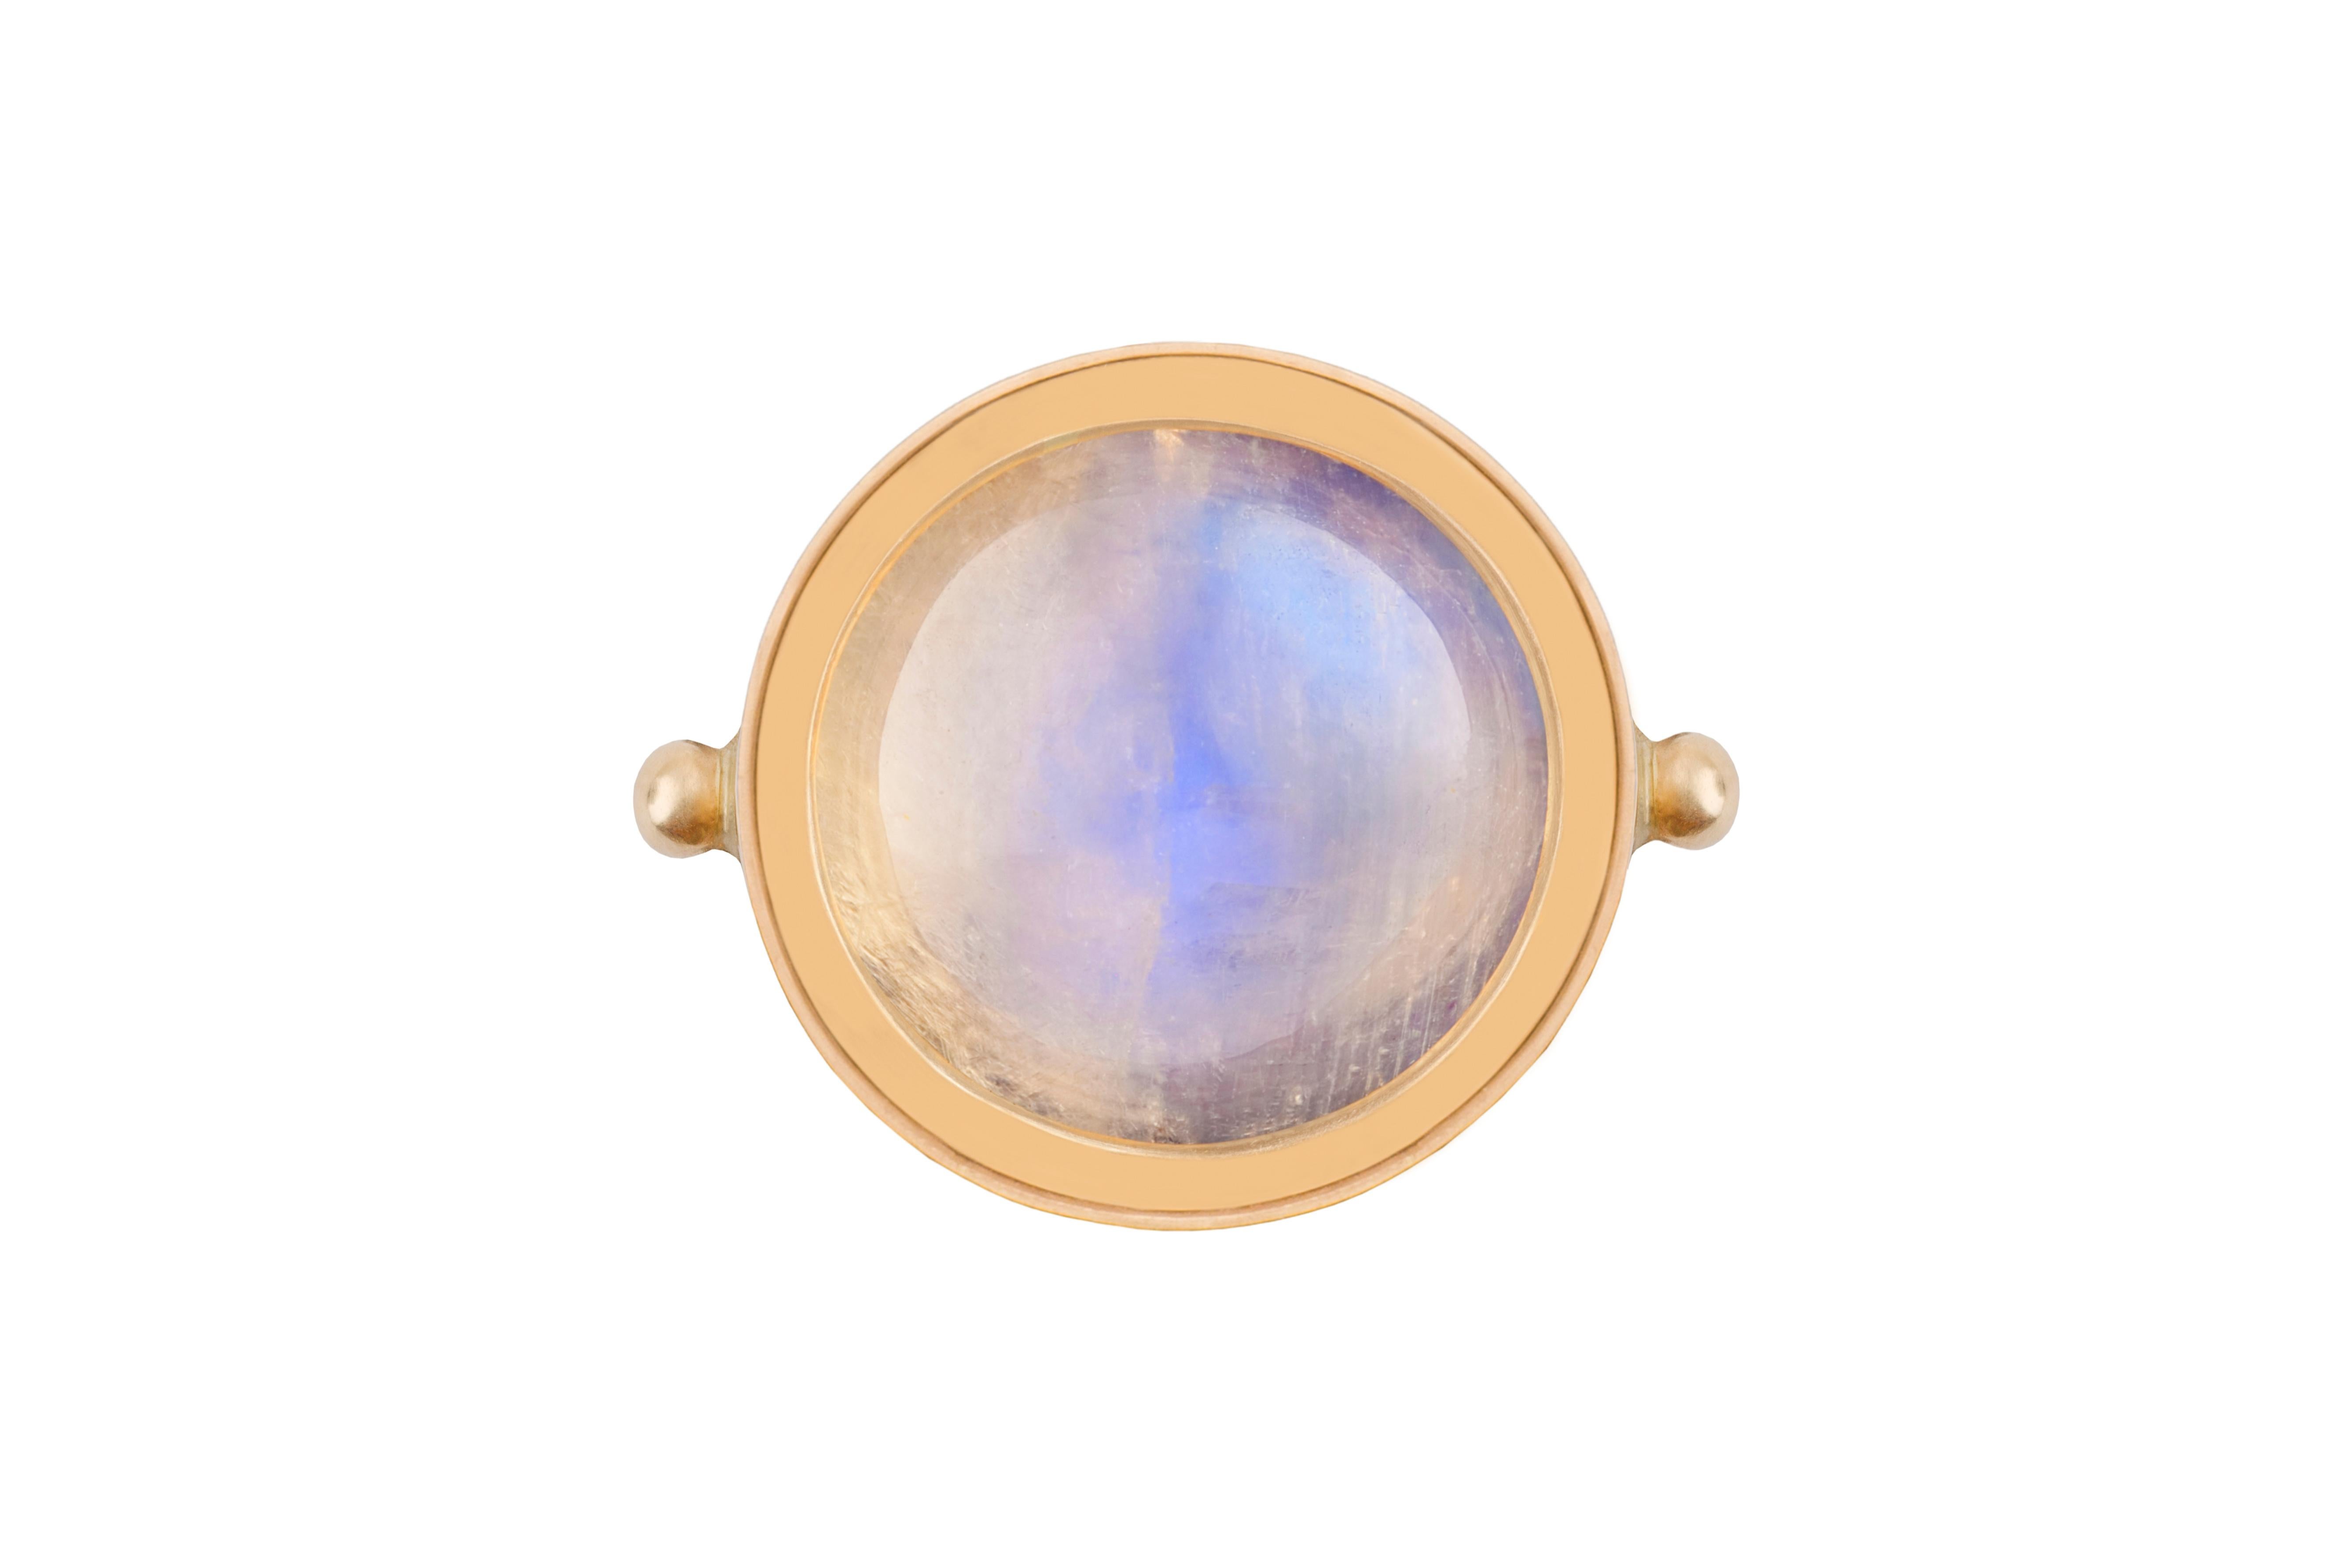 OUROBOROS round cabochon rainbow moonstone set in 18kt gold ring

This ring comes in various different sizes so please contact the designer.

OUROBOROS’ commitment to using only the most unique stones set in 18 or 24 Karat gold, is matched only to